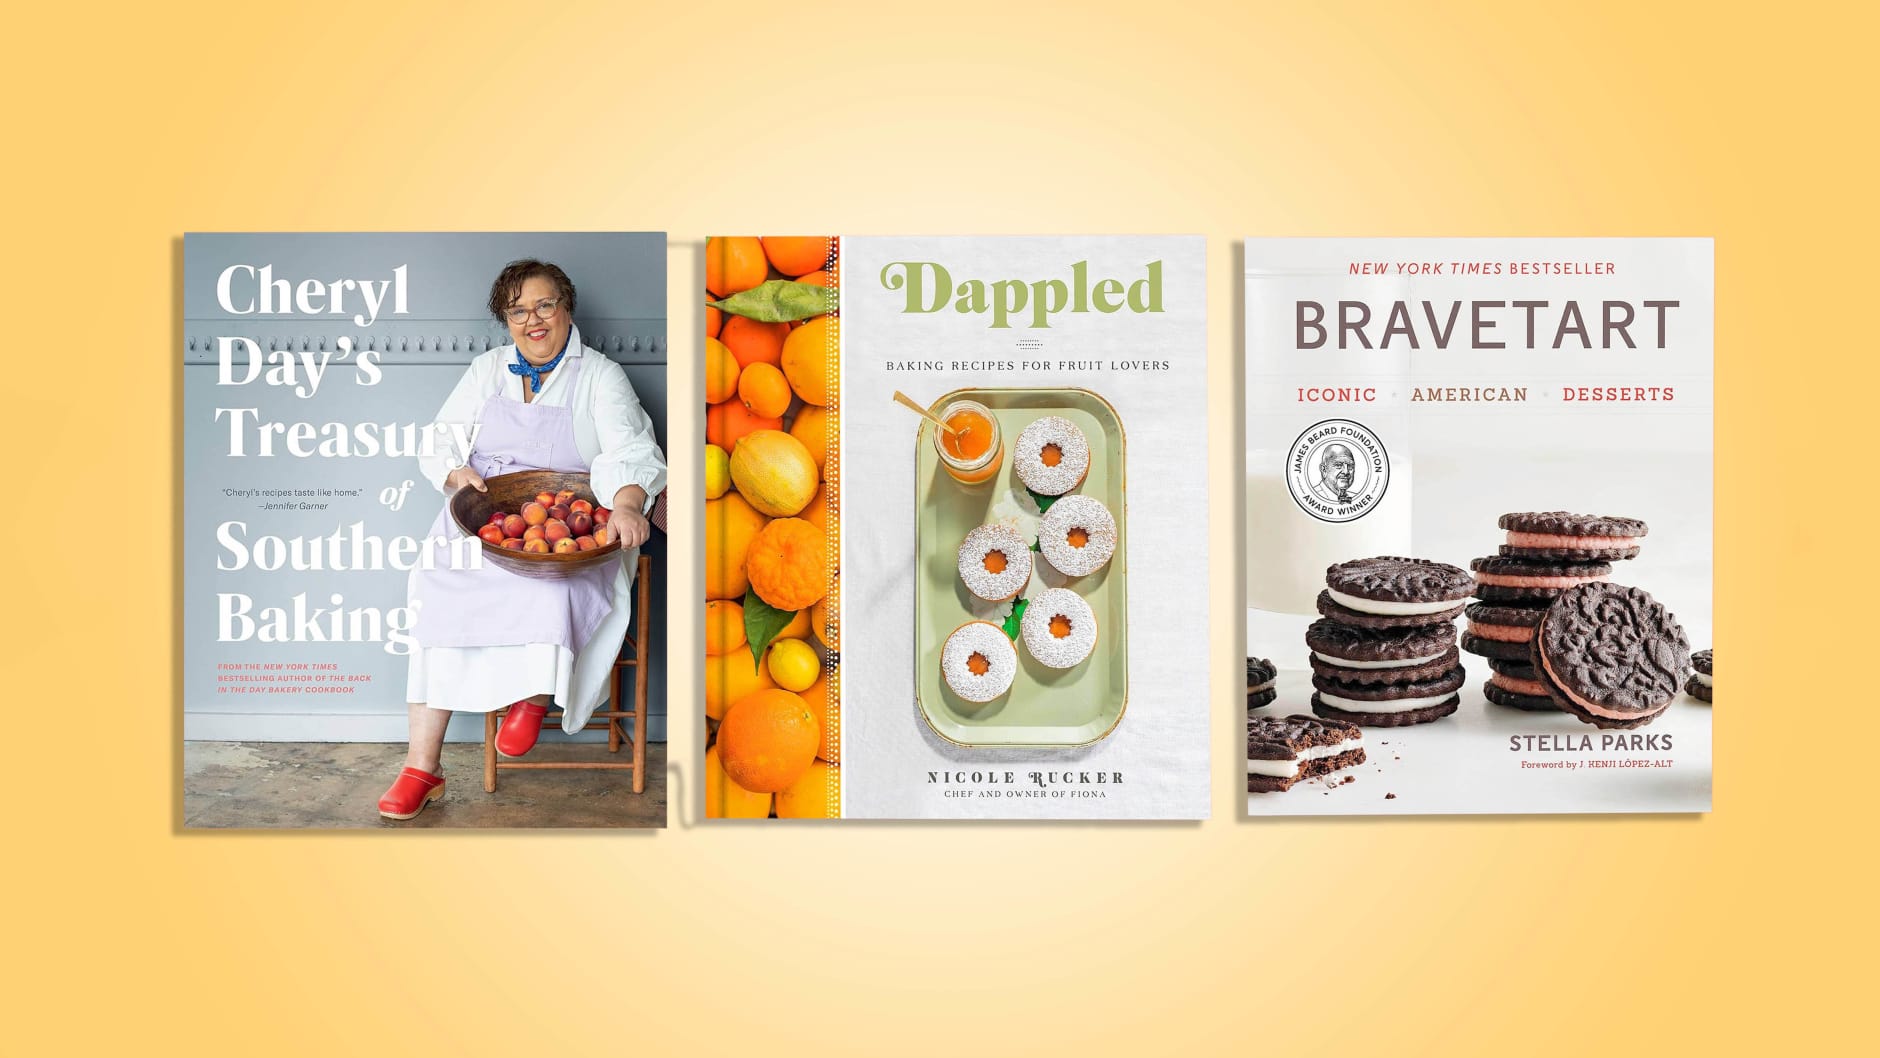 The 10 Best Baking Cookbooks for Aspiring Pastry Chefs and Home Bakers